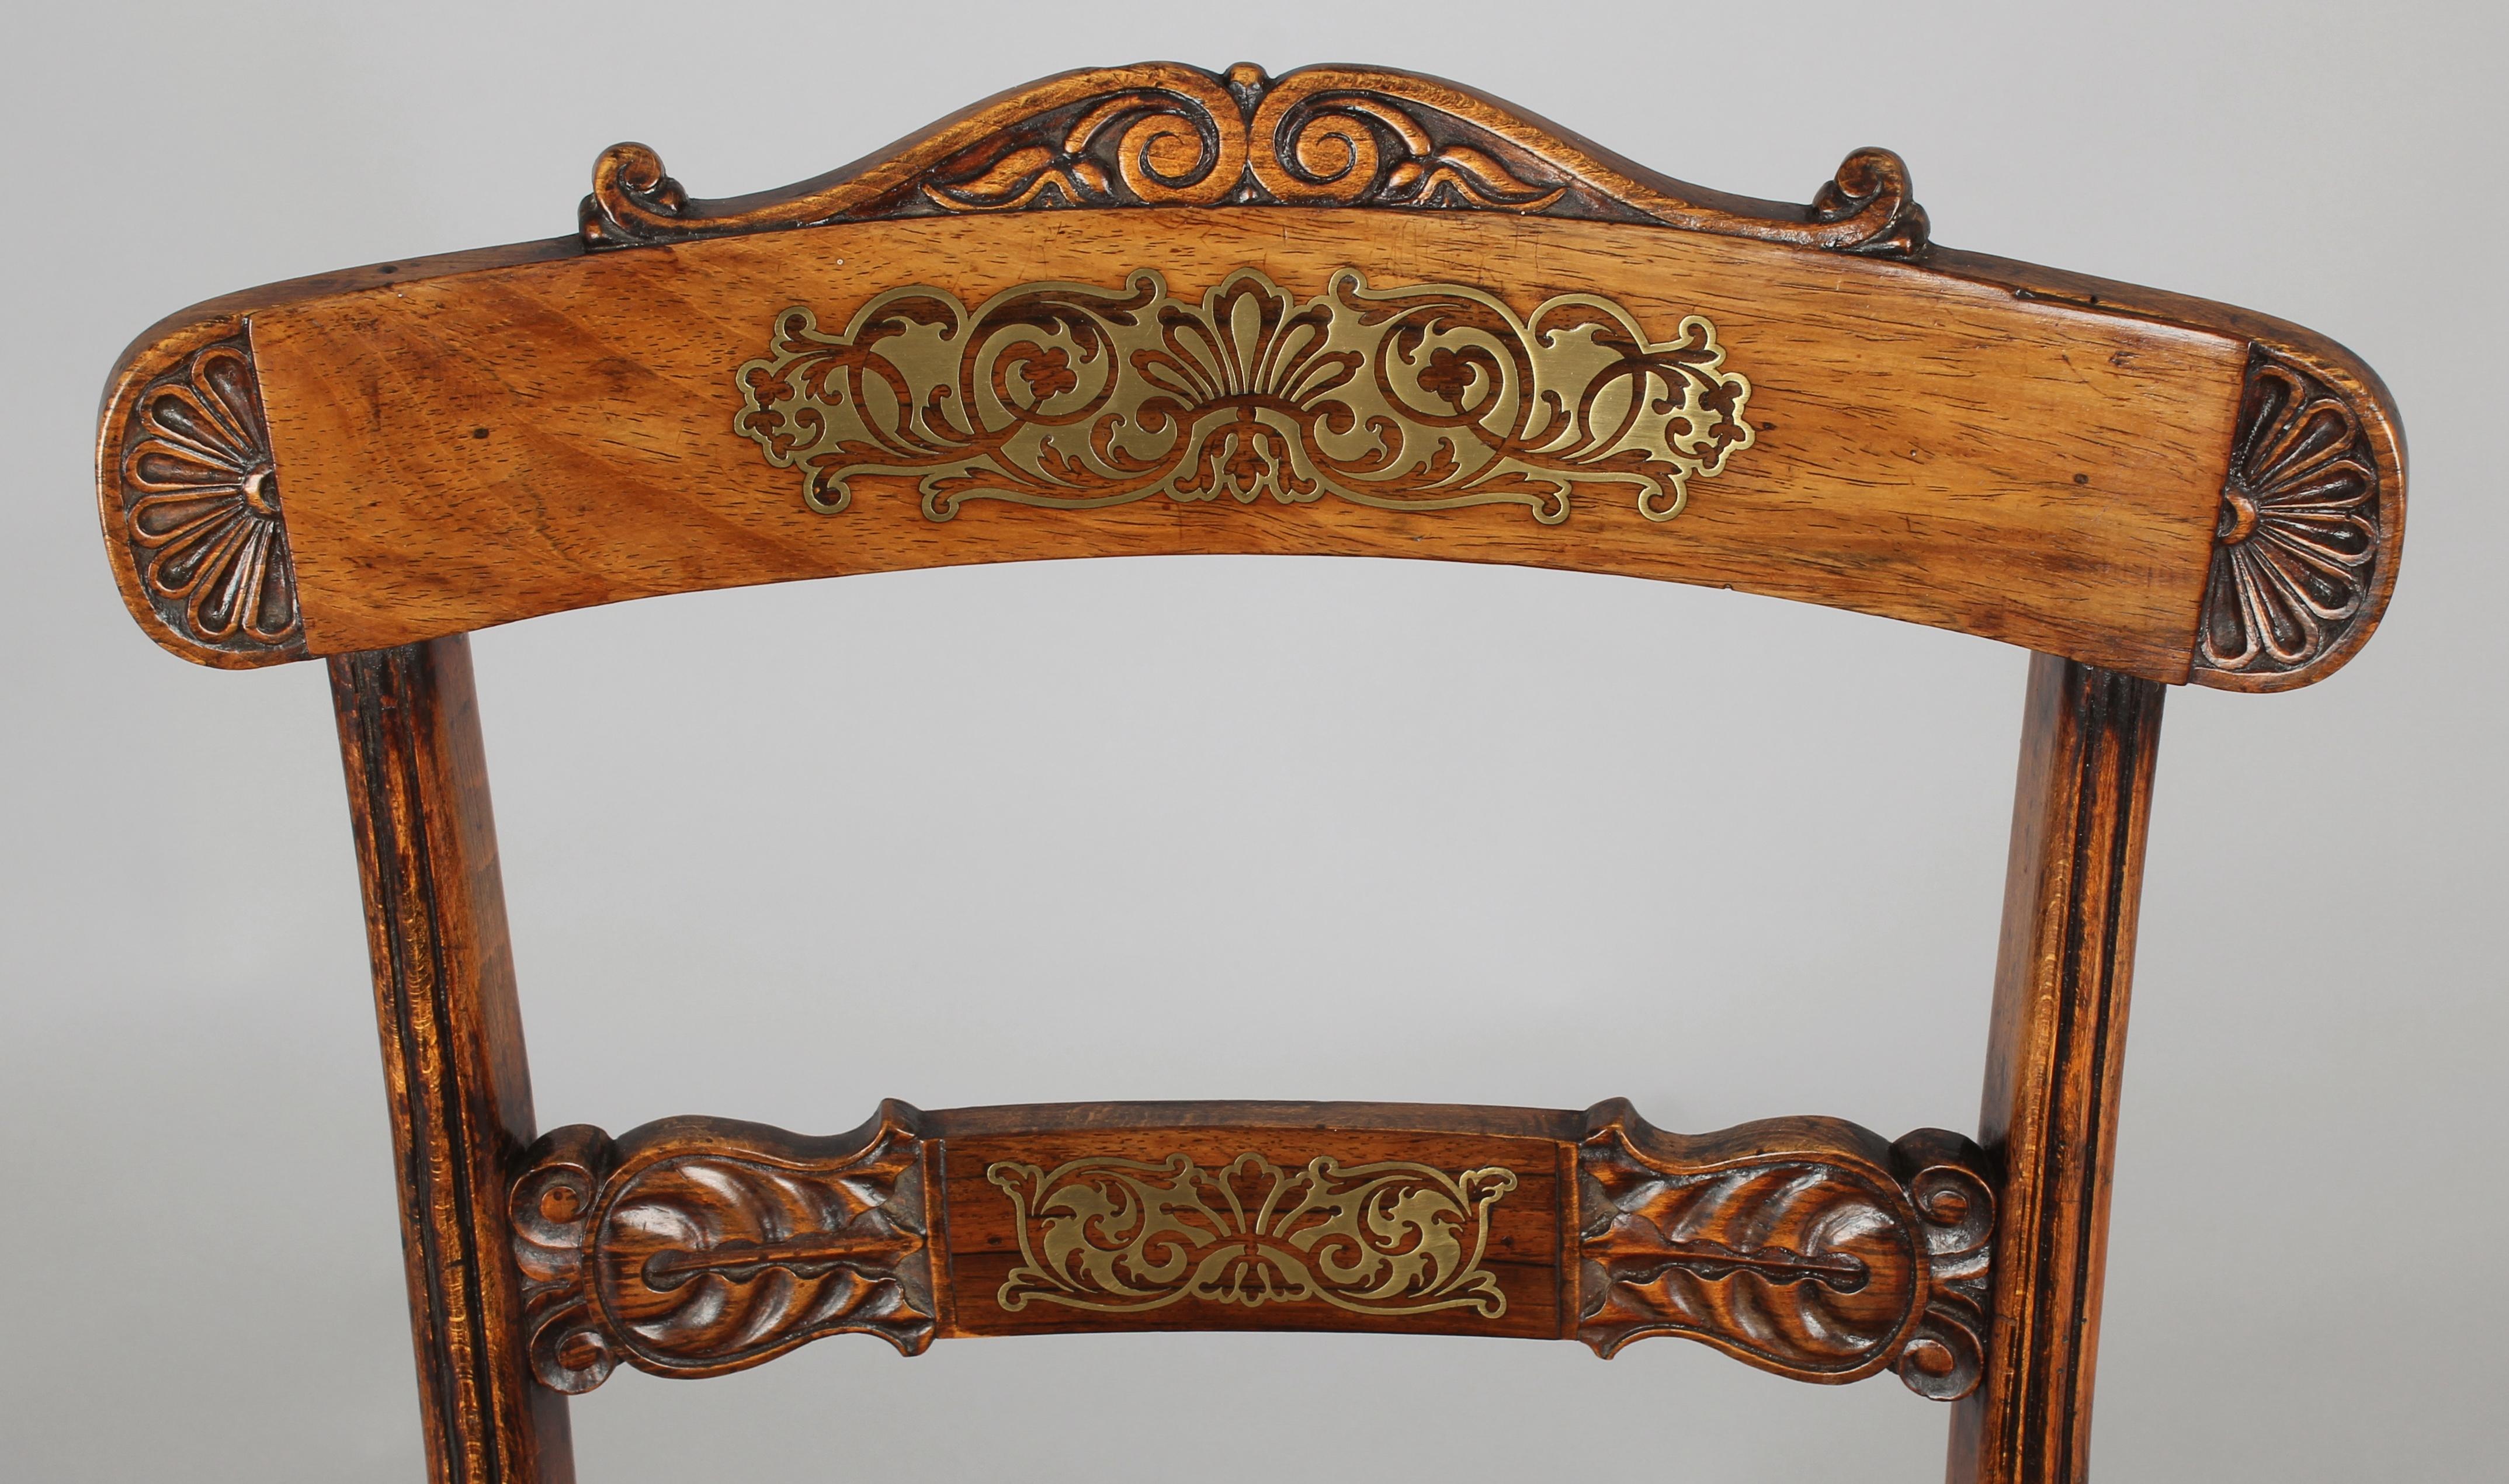 Set of eight Regency period simulated rosewood and brass inlaid chairs; the backs with carved lunette, foliate and scrolled decoration, and the overhanging top-rails and mid-rails with inlaid cut-brass arabesque panels on grounds of rosewood veneer.